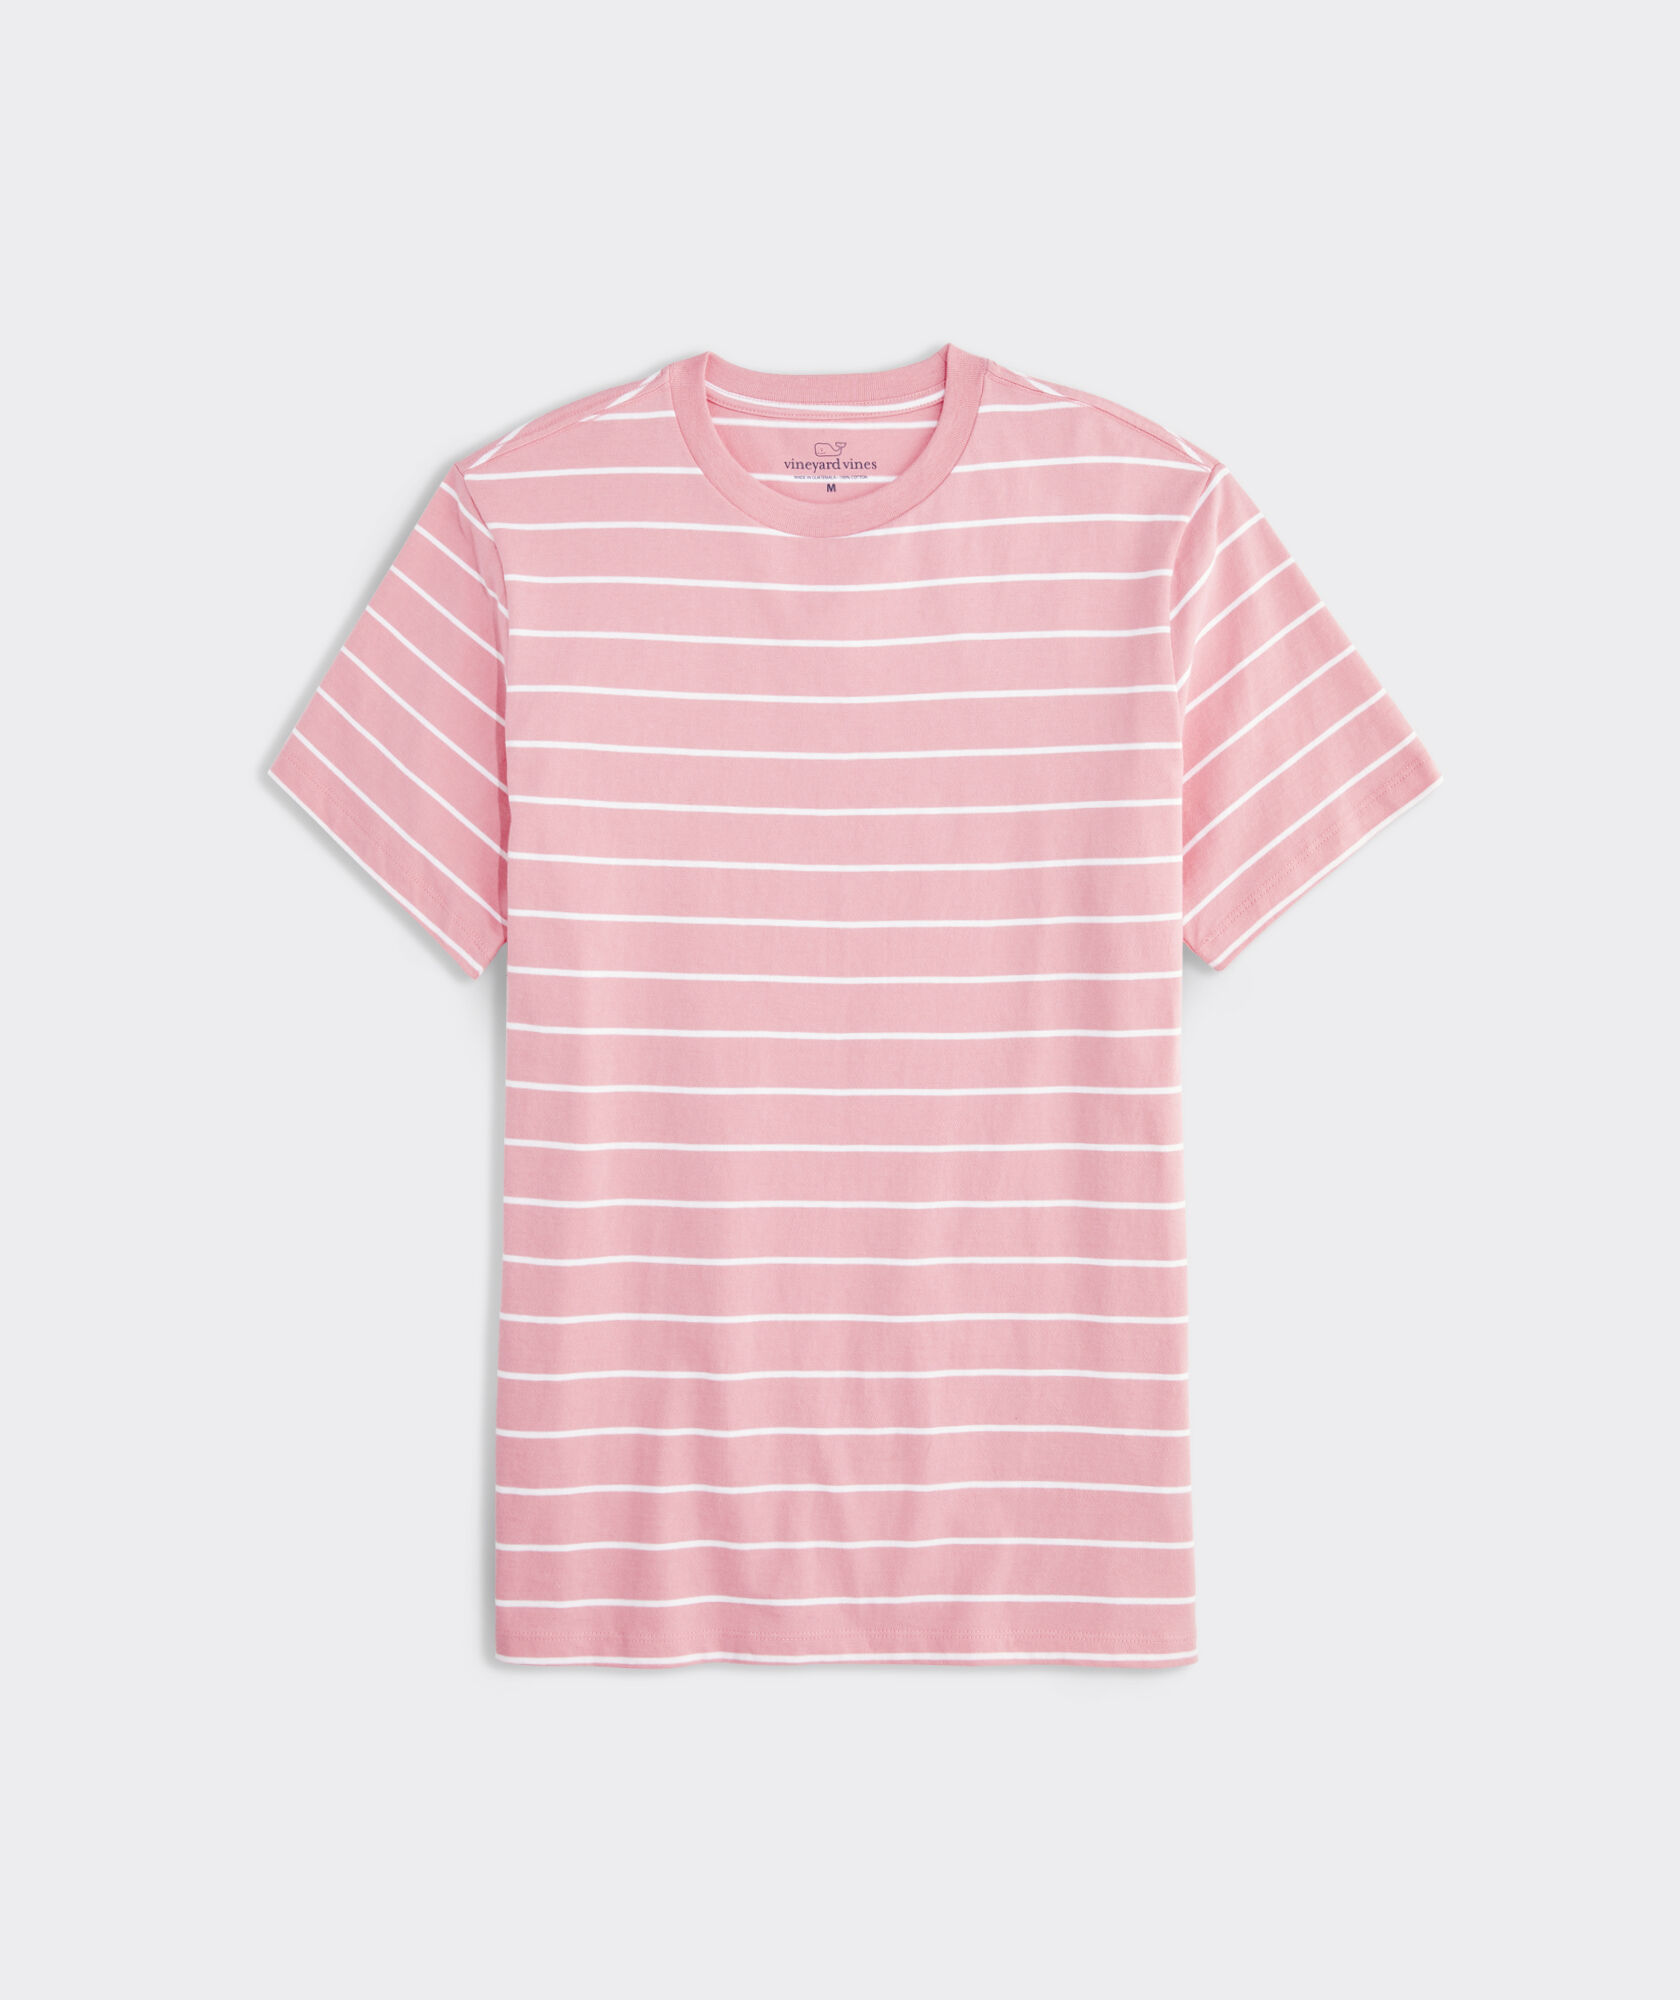 Foredeck Striped Short-Sleeve Tee